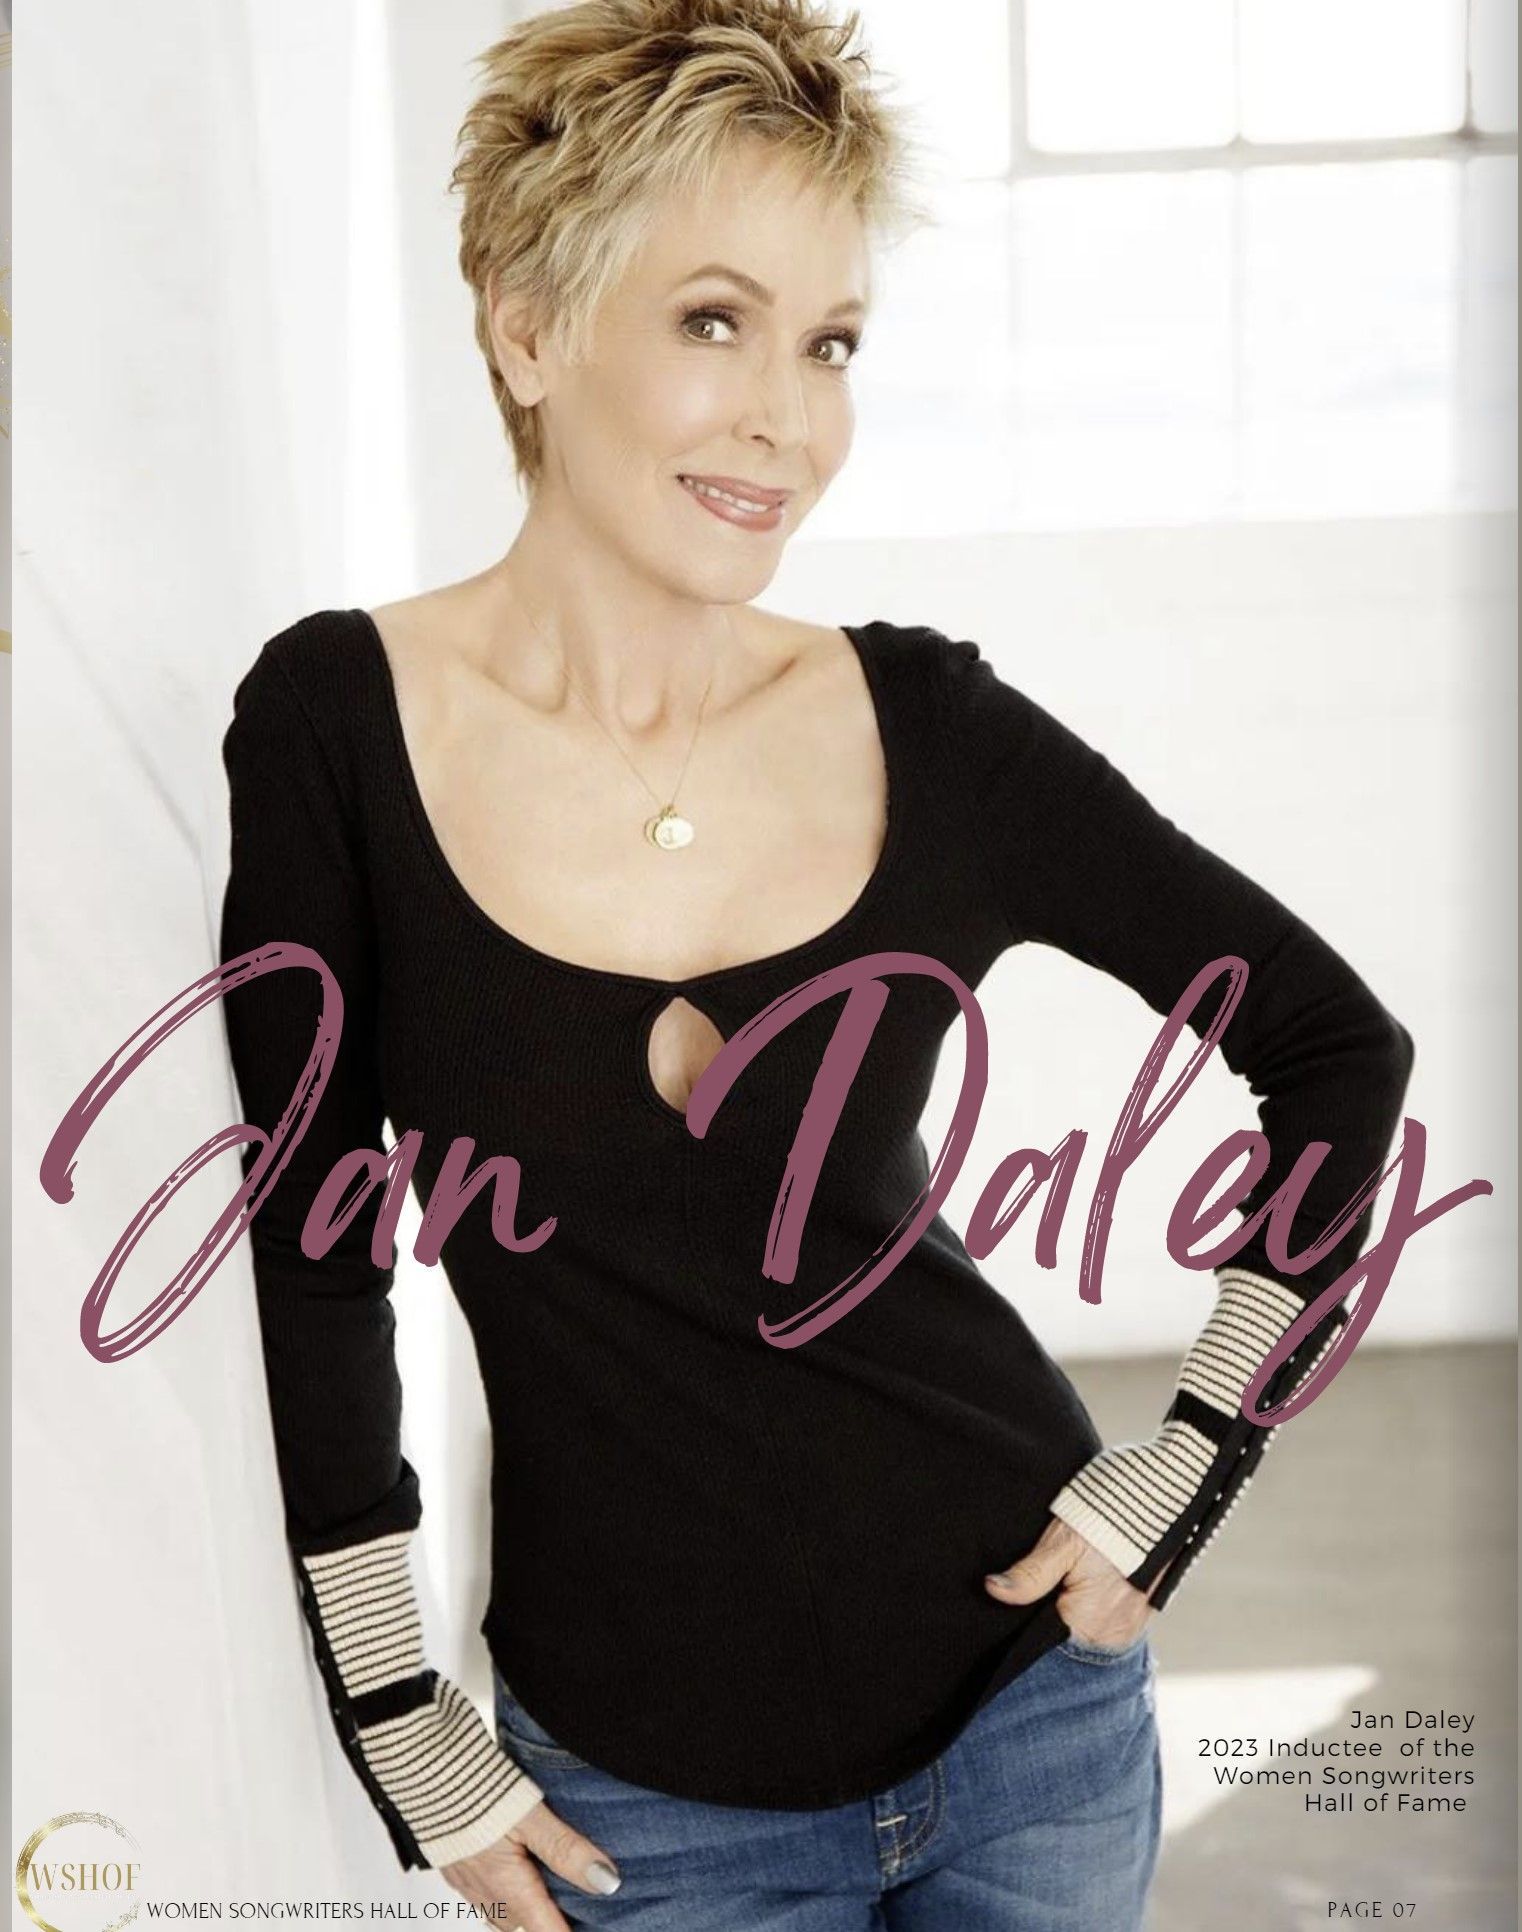 A woman in a black shirt with the name jan daley on it